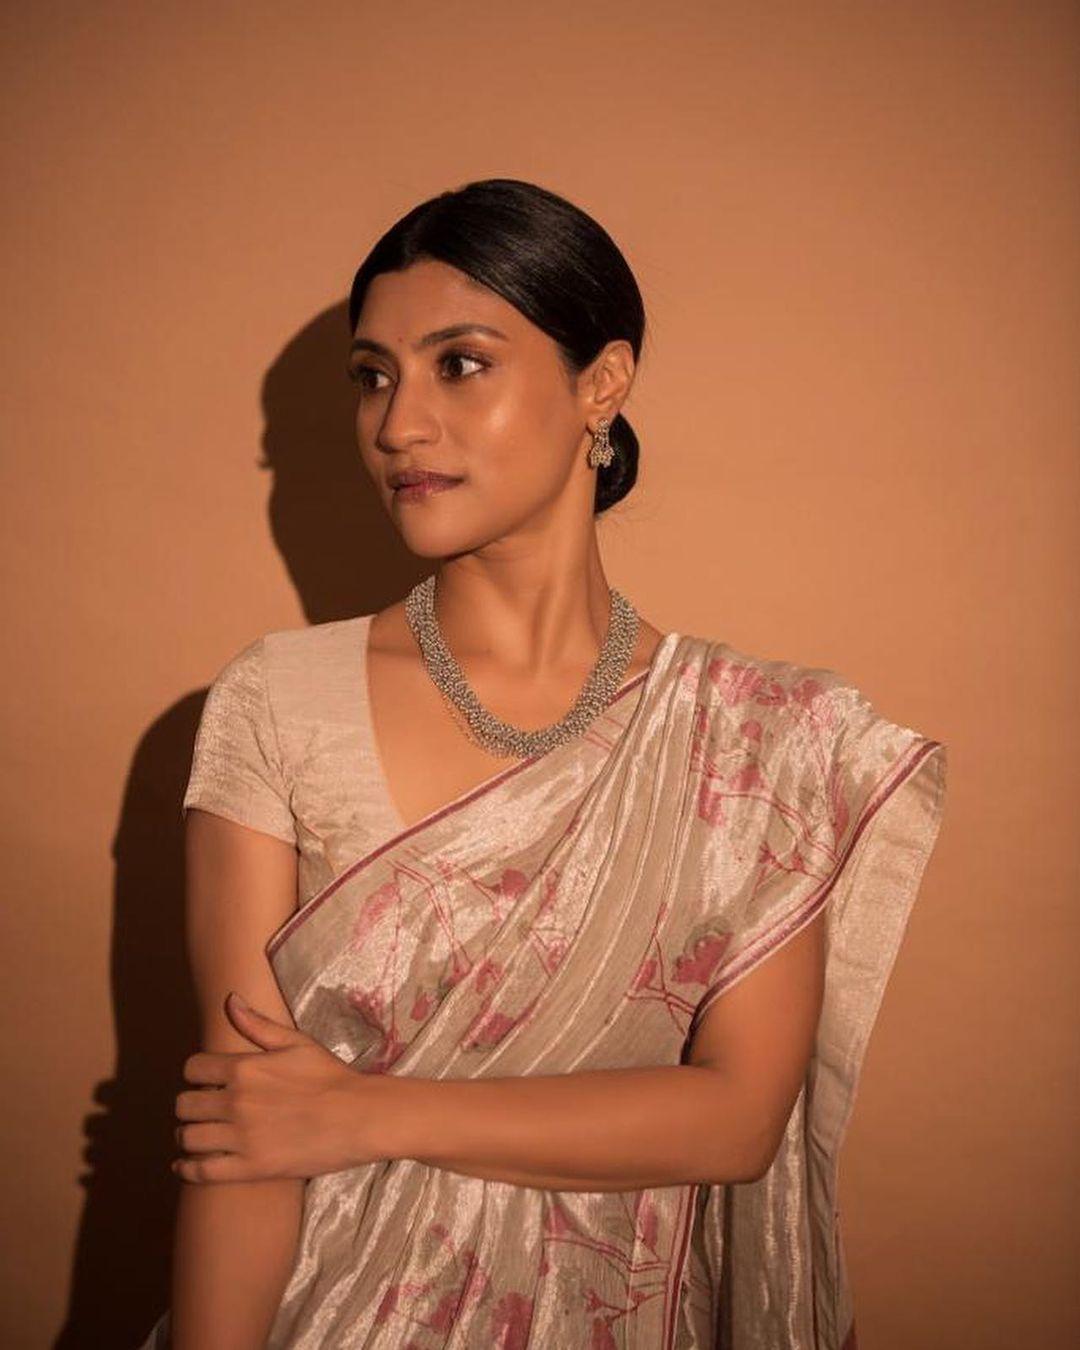 Konkona Sen Sharma looked absolutely glamorous in a pink saree that had a texture resembling tissue fabric.